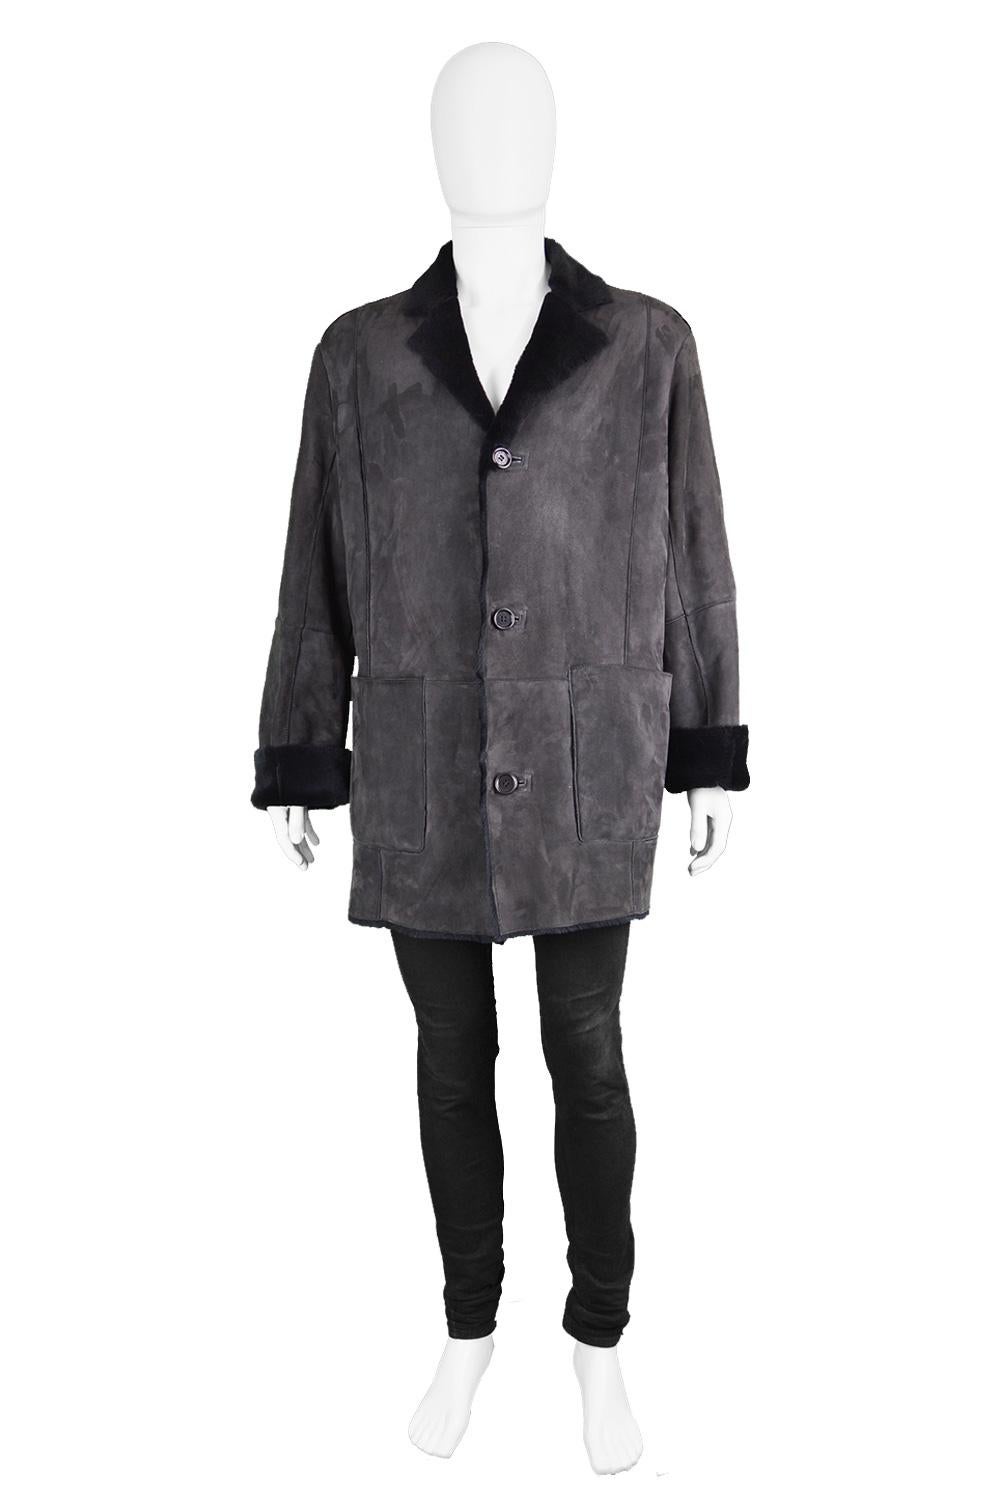 A luxury men's vintage black sheepskin ovine suede and fur vintage overcoat by Pancaldi & B from the 1990s. 

Click 'CONTINUE READING' below for Size & Description.

Size: Marked 52 which is roughly a men's Large to XL. Please check